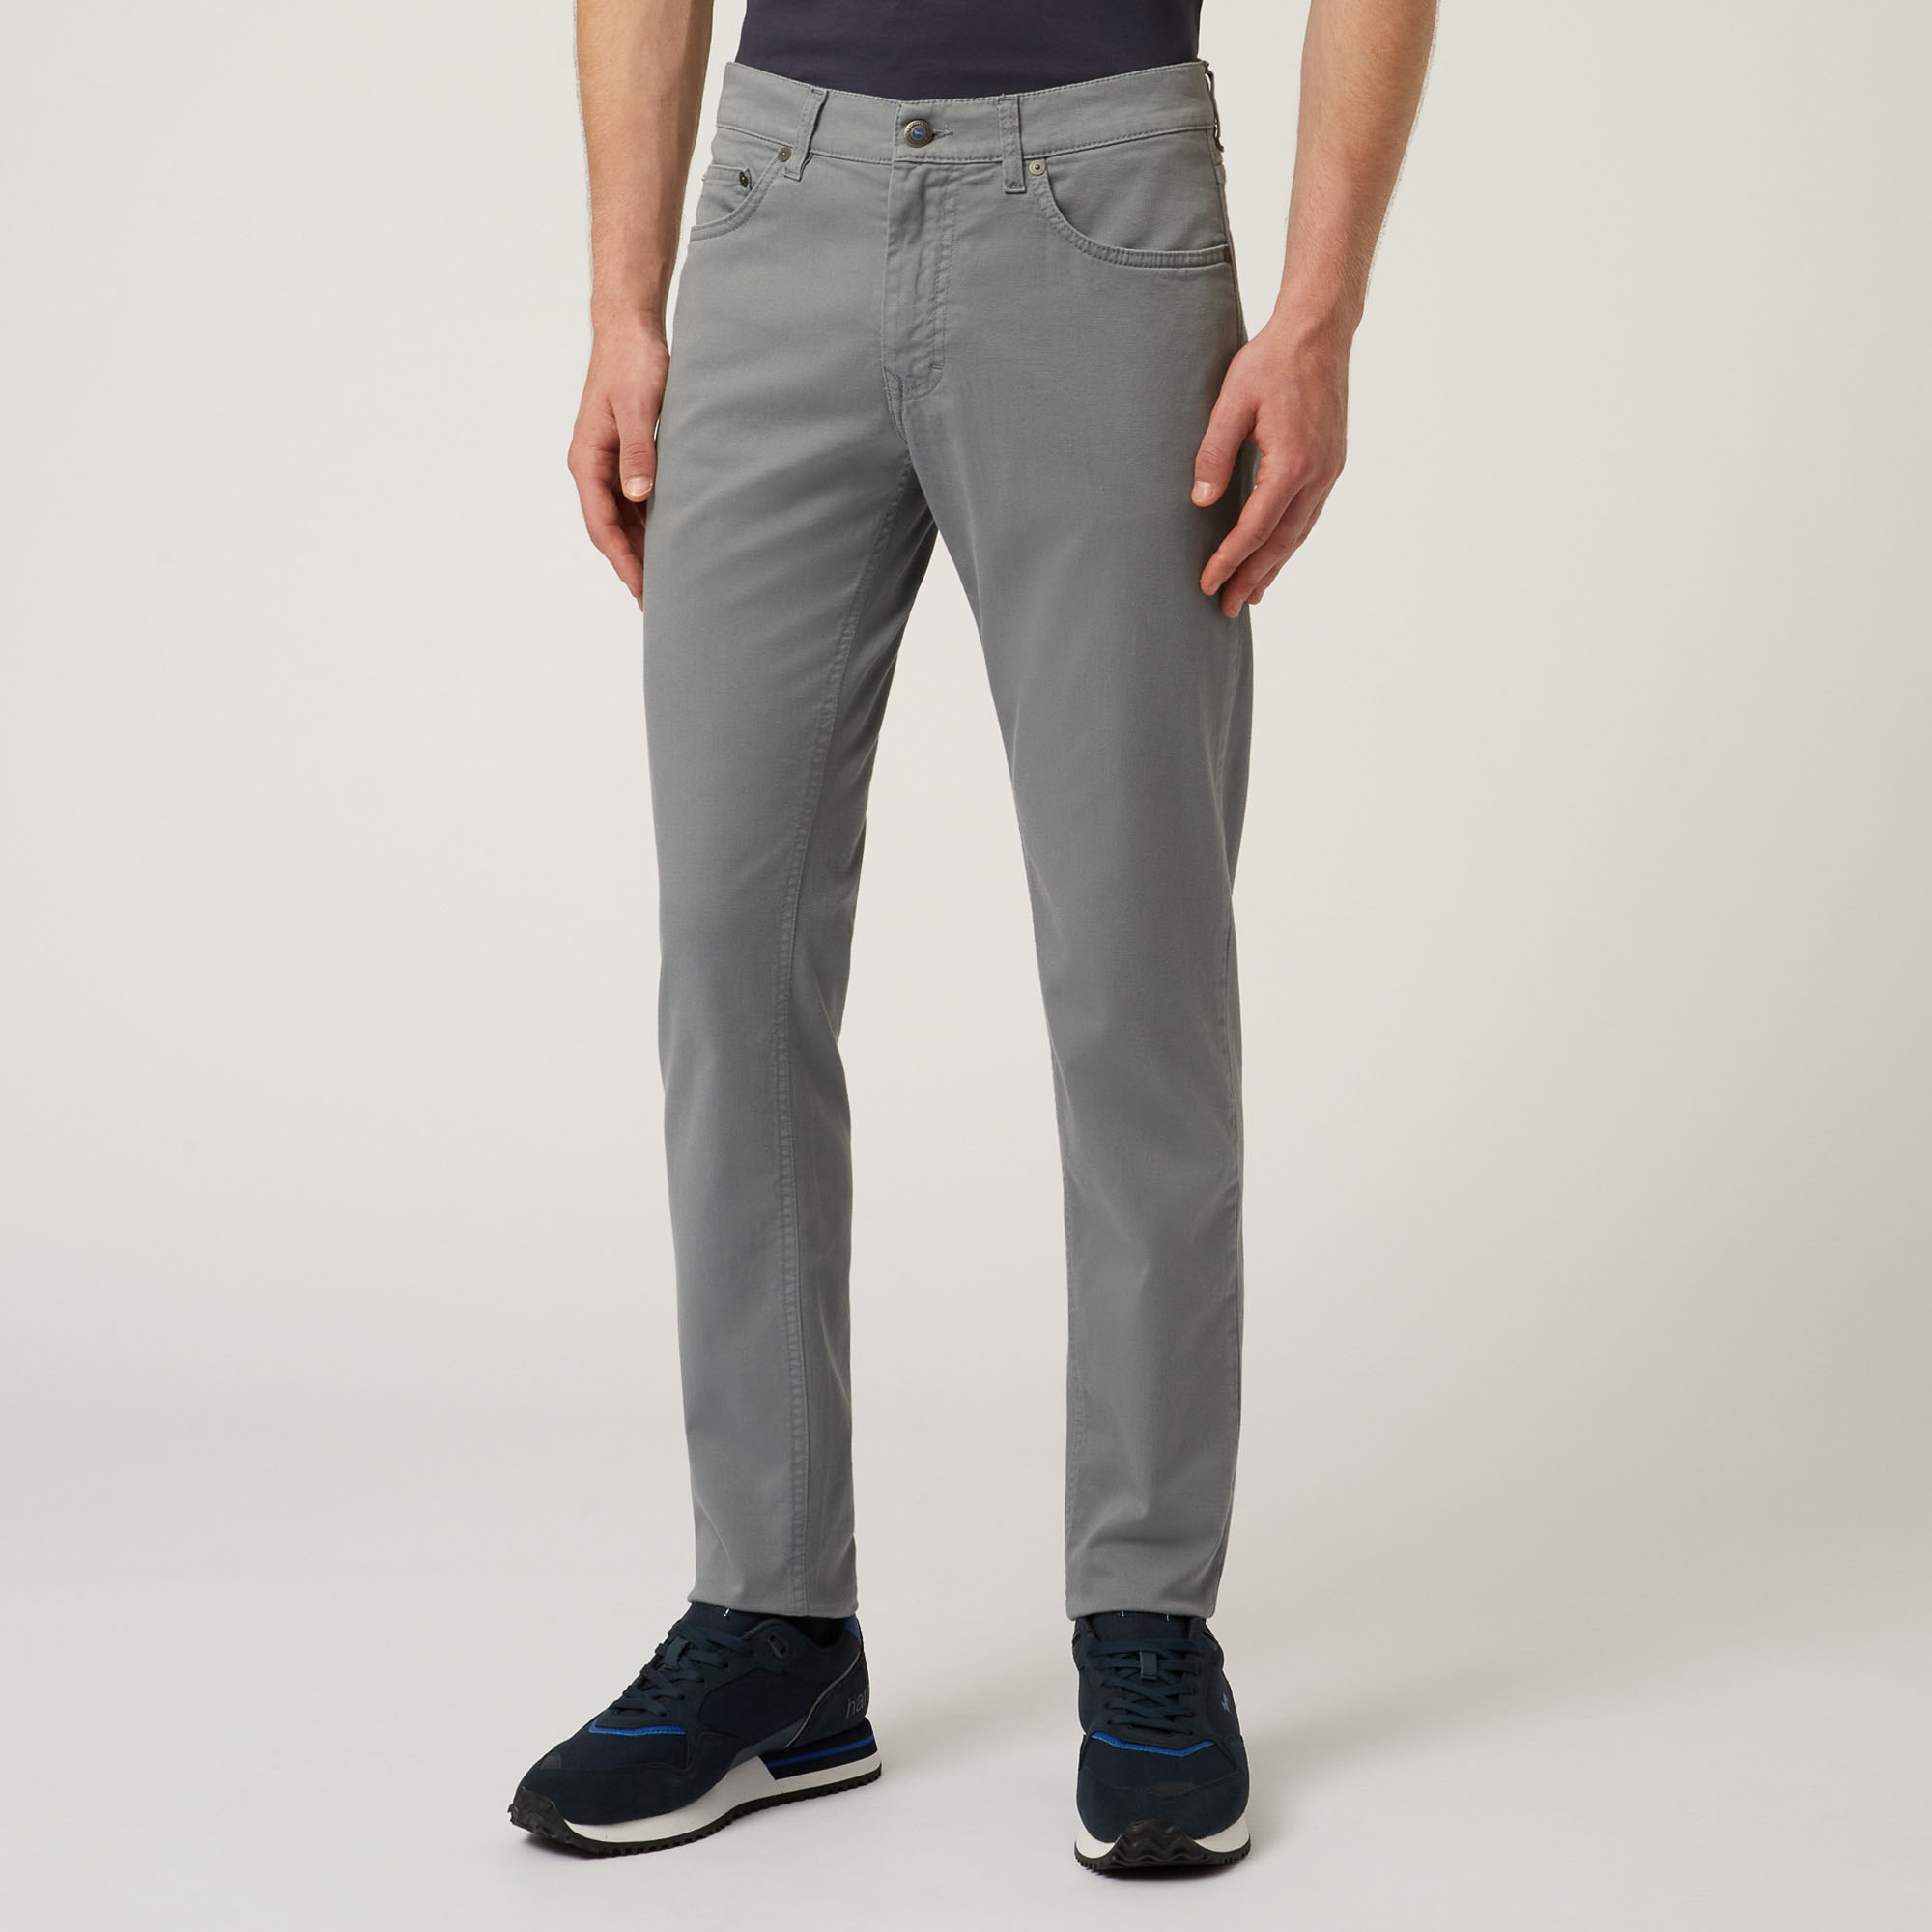 Essentials trousers in plain coloured cotton in Grey: Luxury